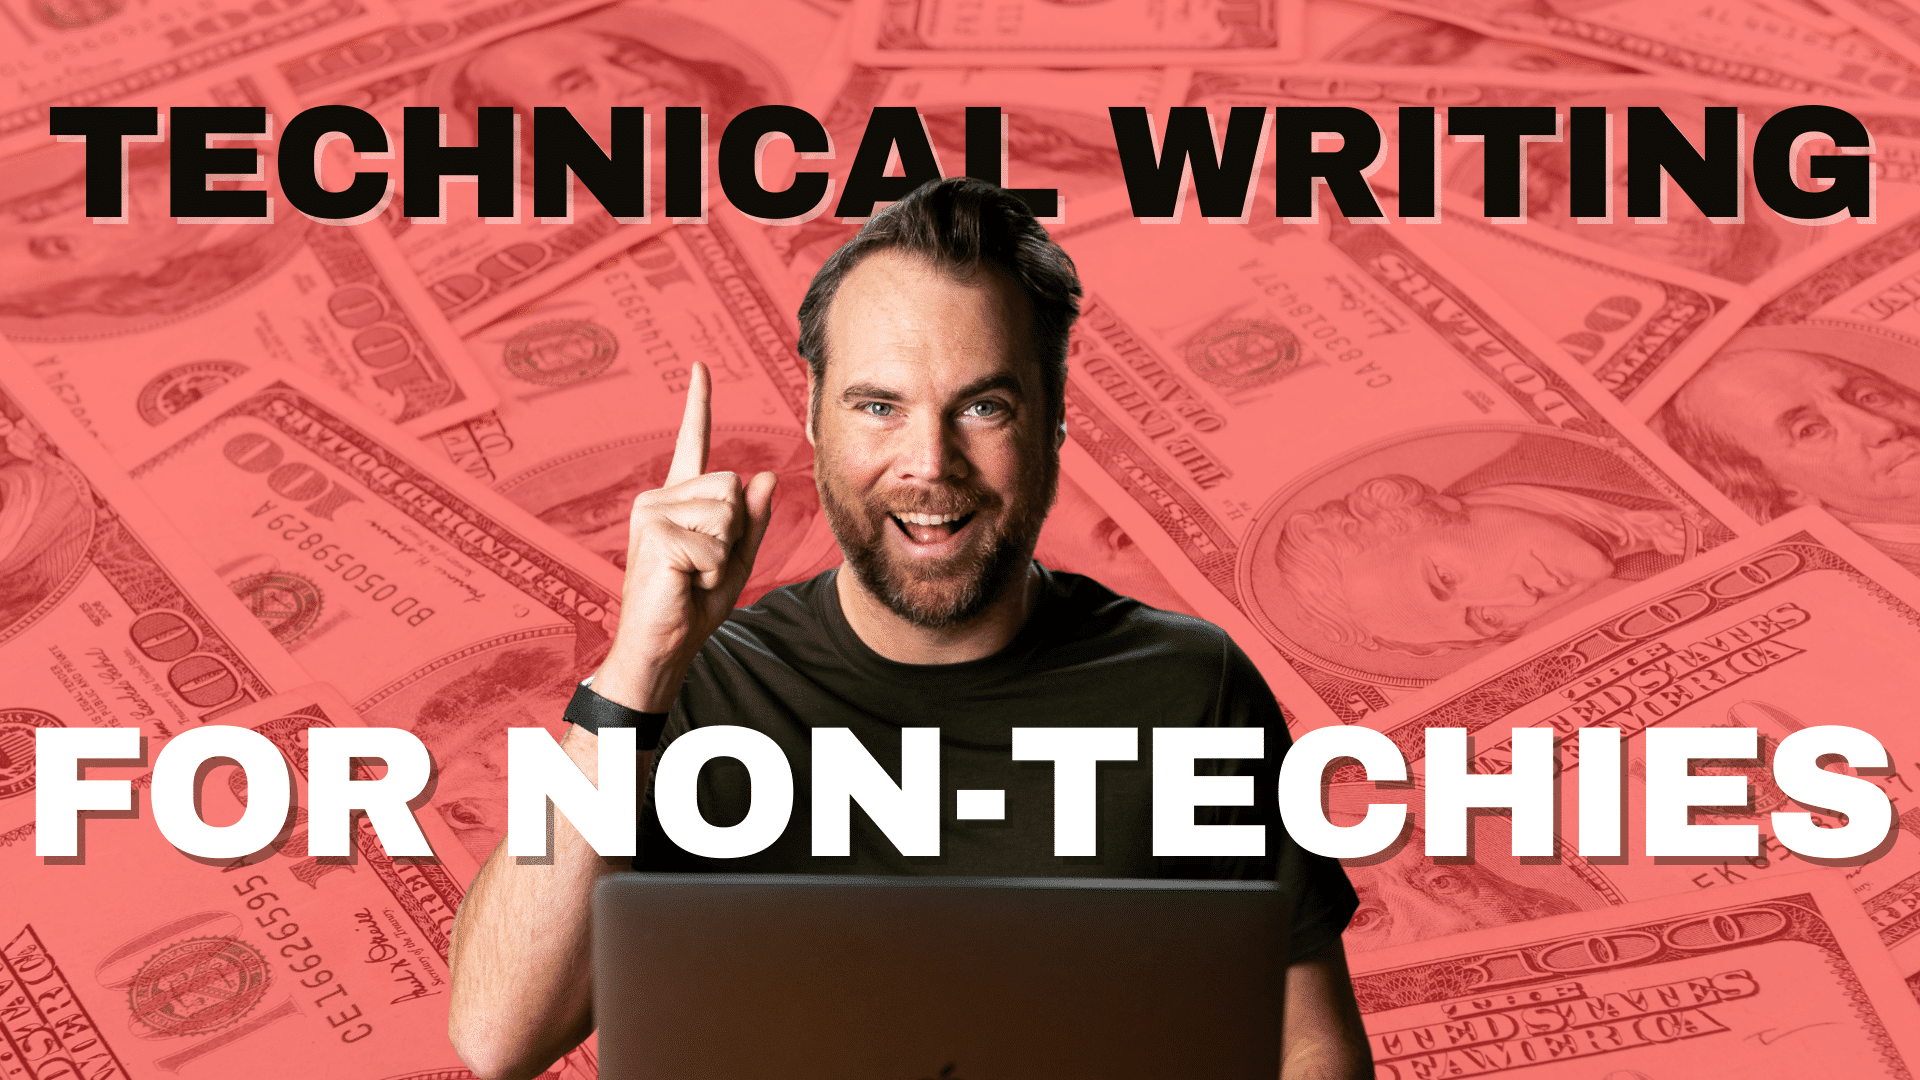 Everything You Need to Know to Start a Freelance Technical Writing Business (Even if You’re Not Technical!)